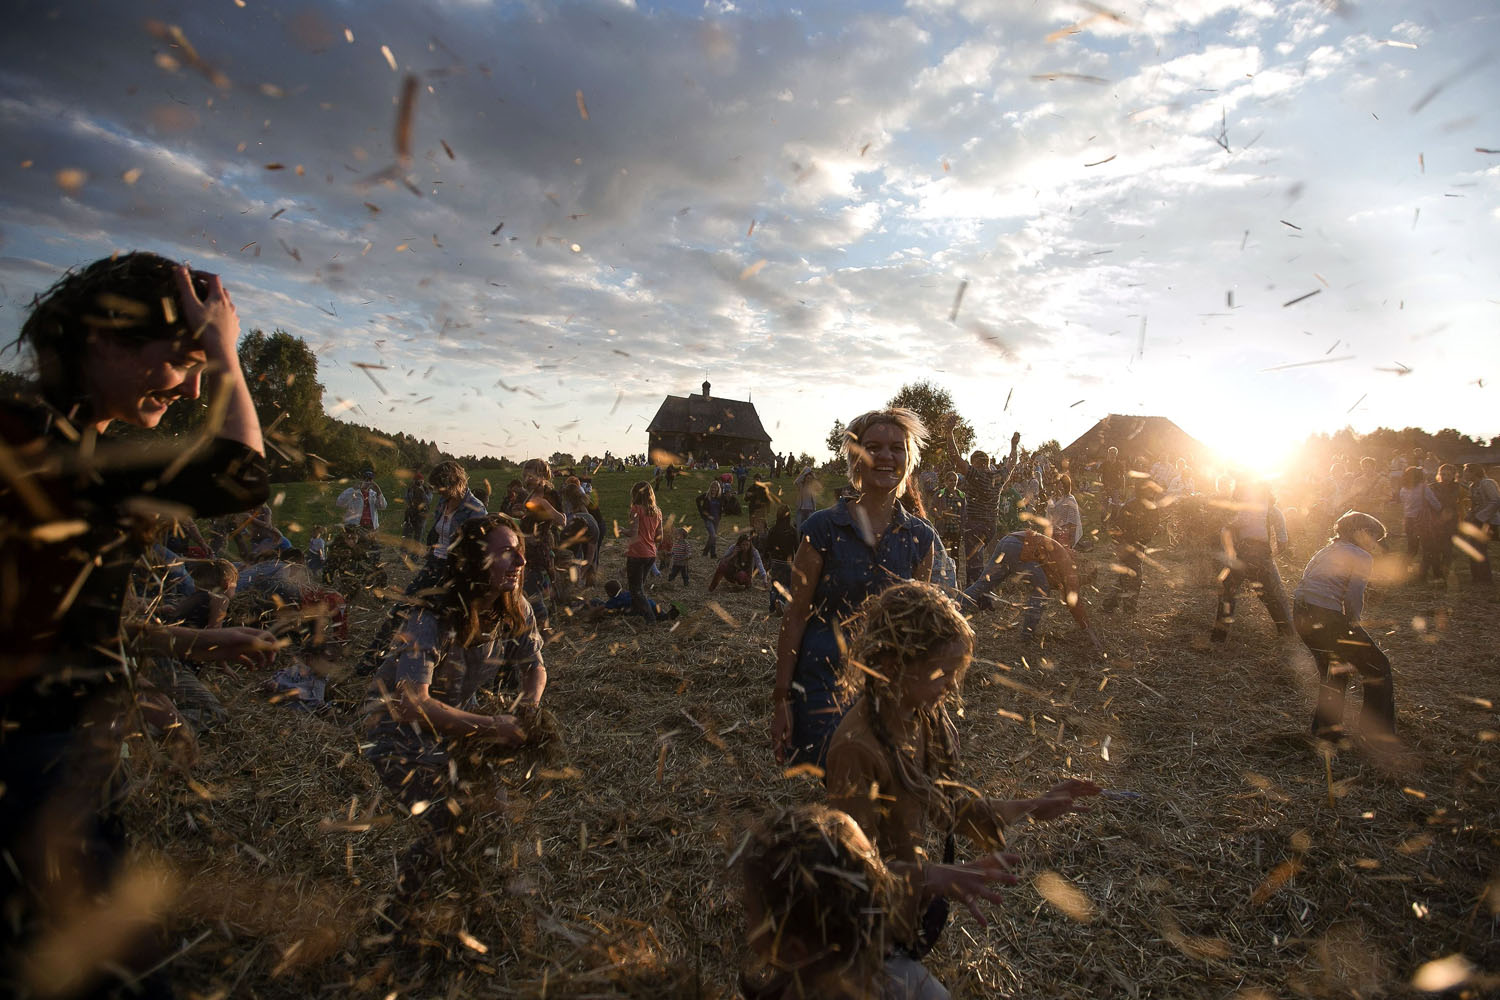 Sept. 6, 2014. People dance and throw straw during a traditional festival in village Ozerco, some 10 km from Minsk.